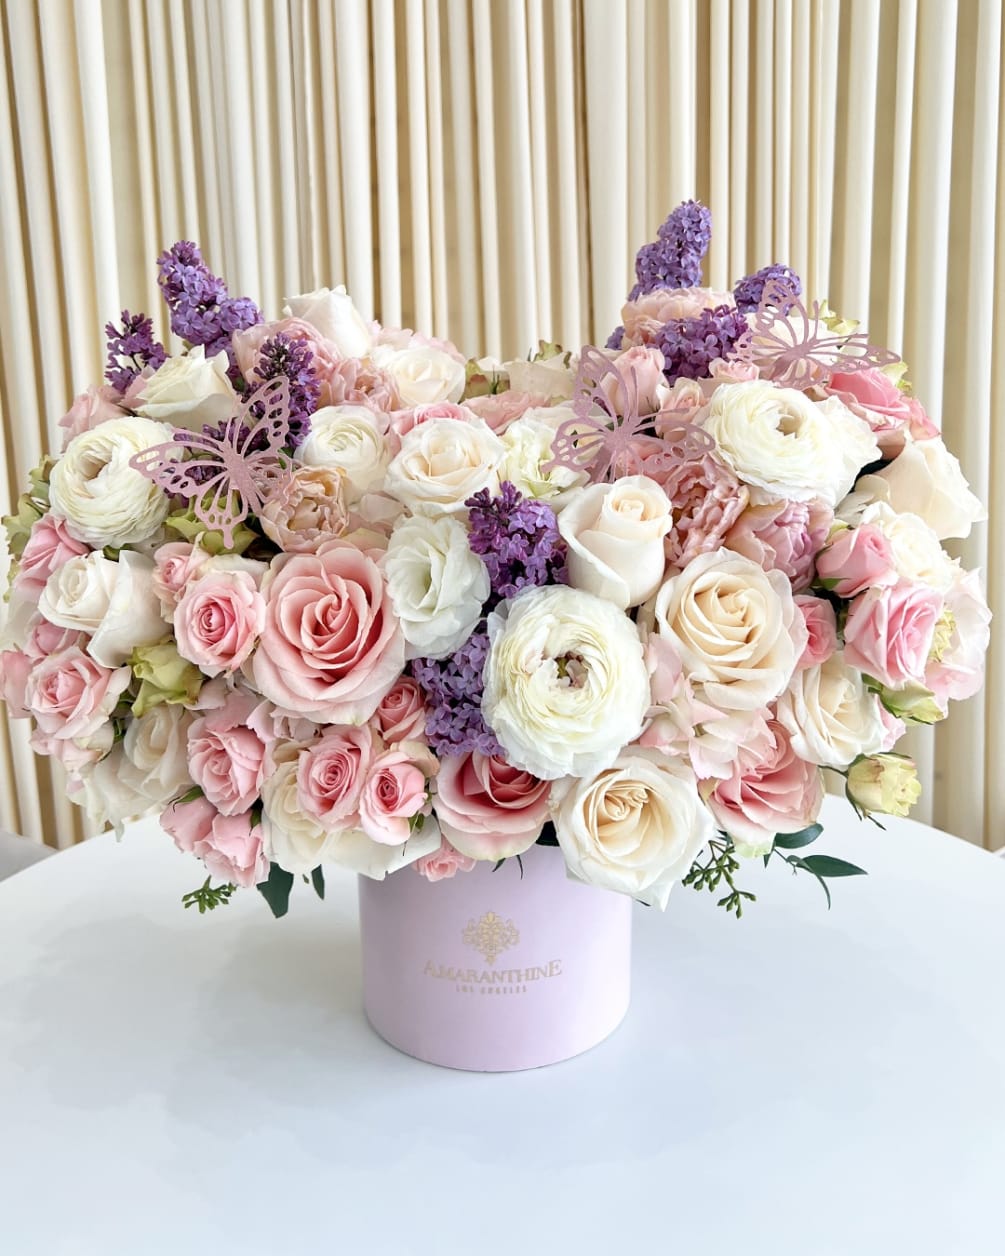 This beautiful flower arrangement features a mix of pink, purple, and white